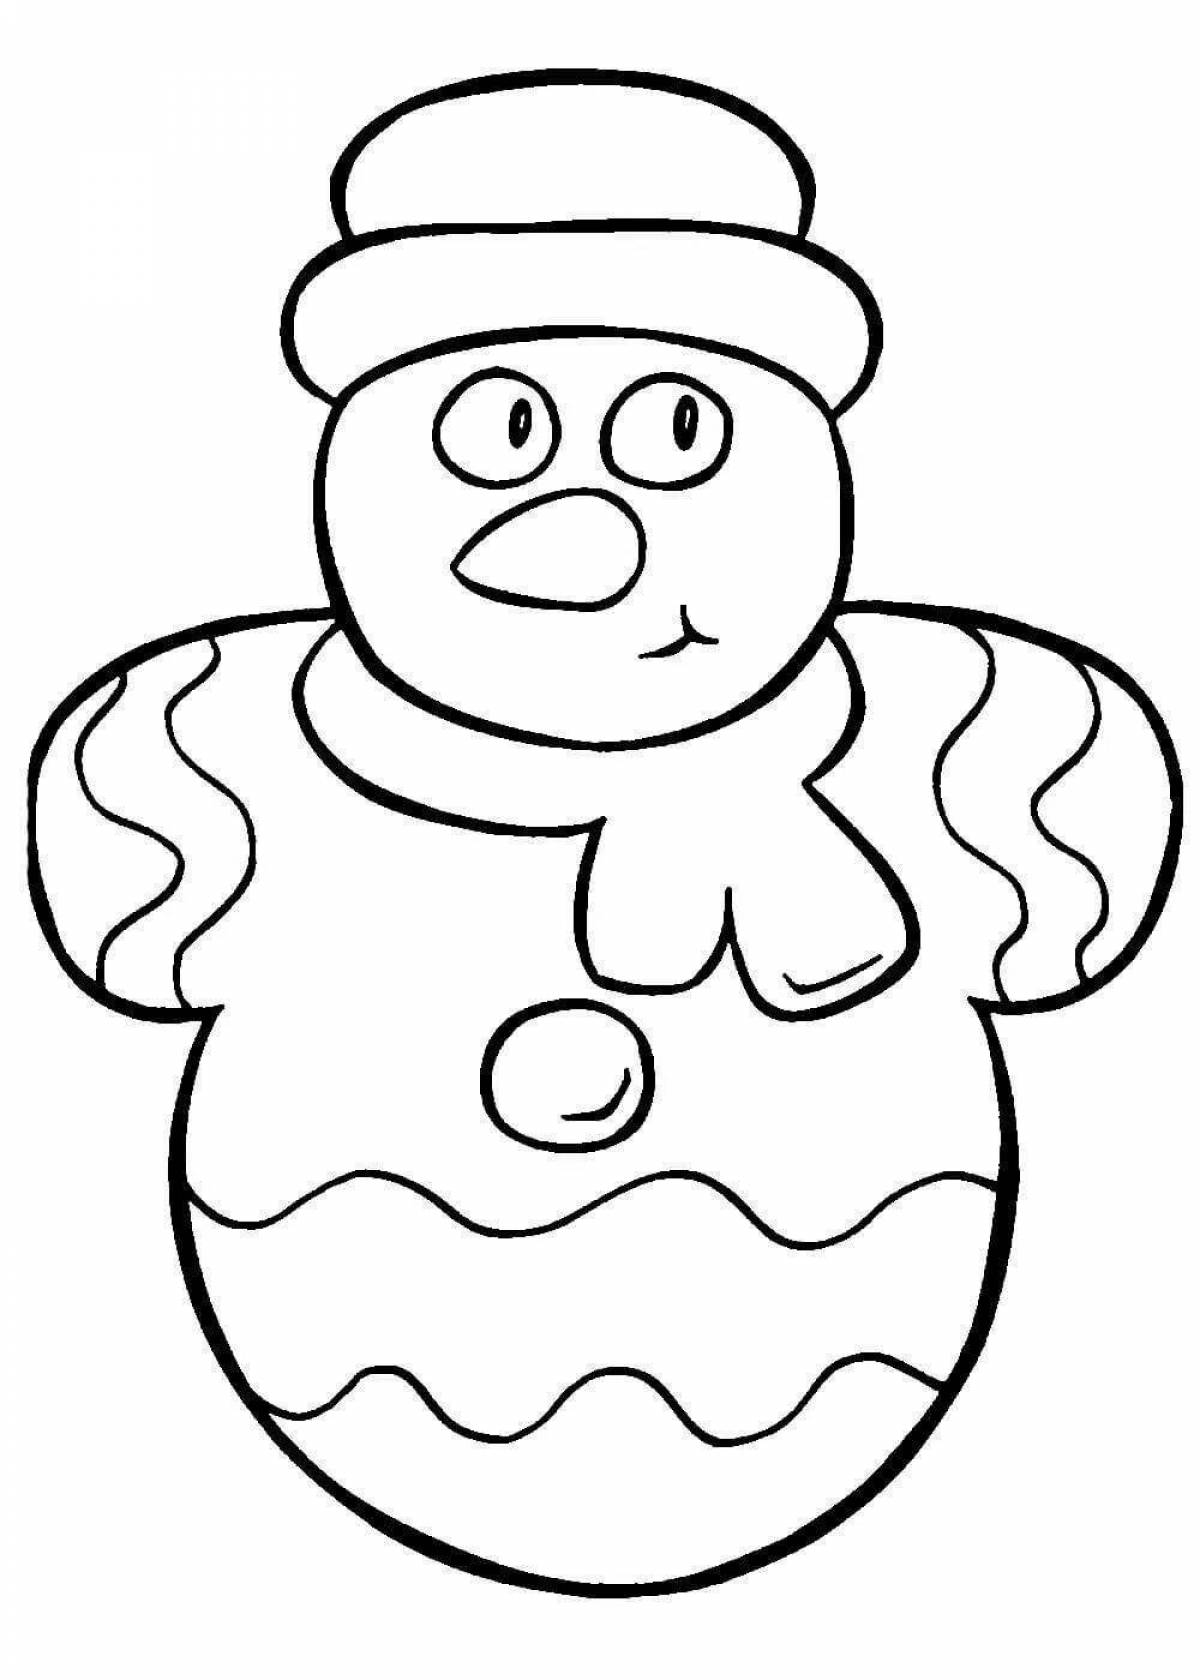 Cute Christmas toys coloring book